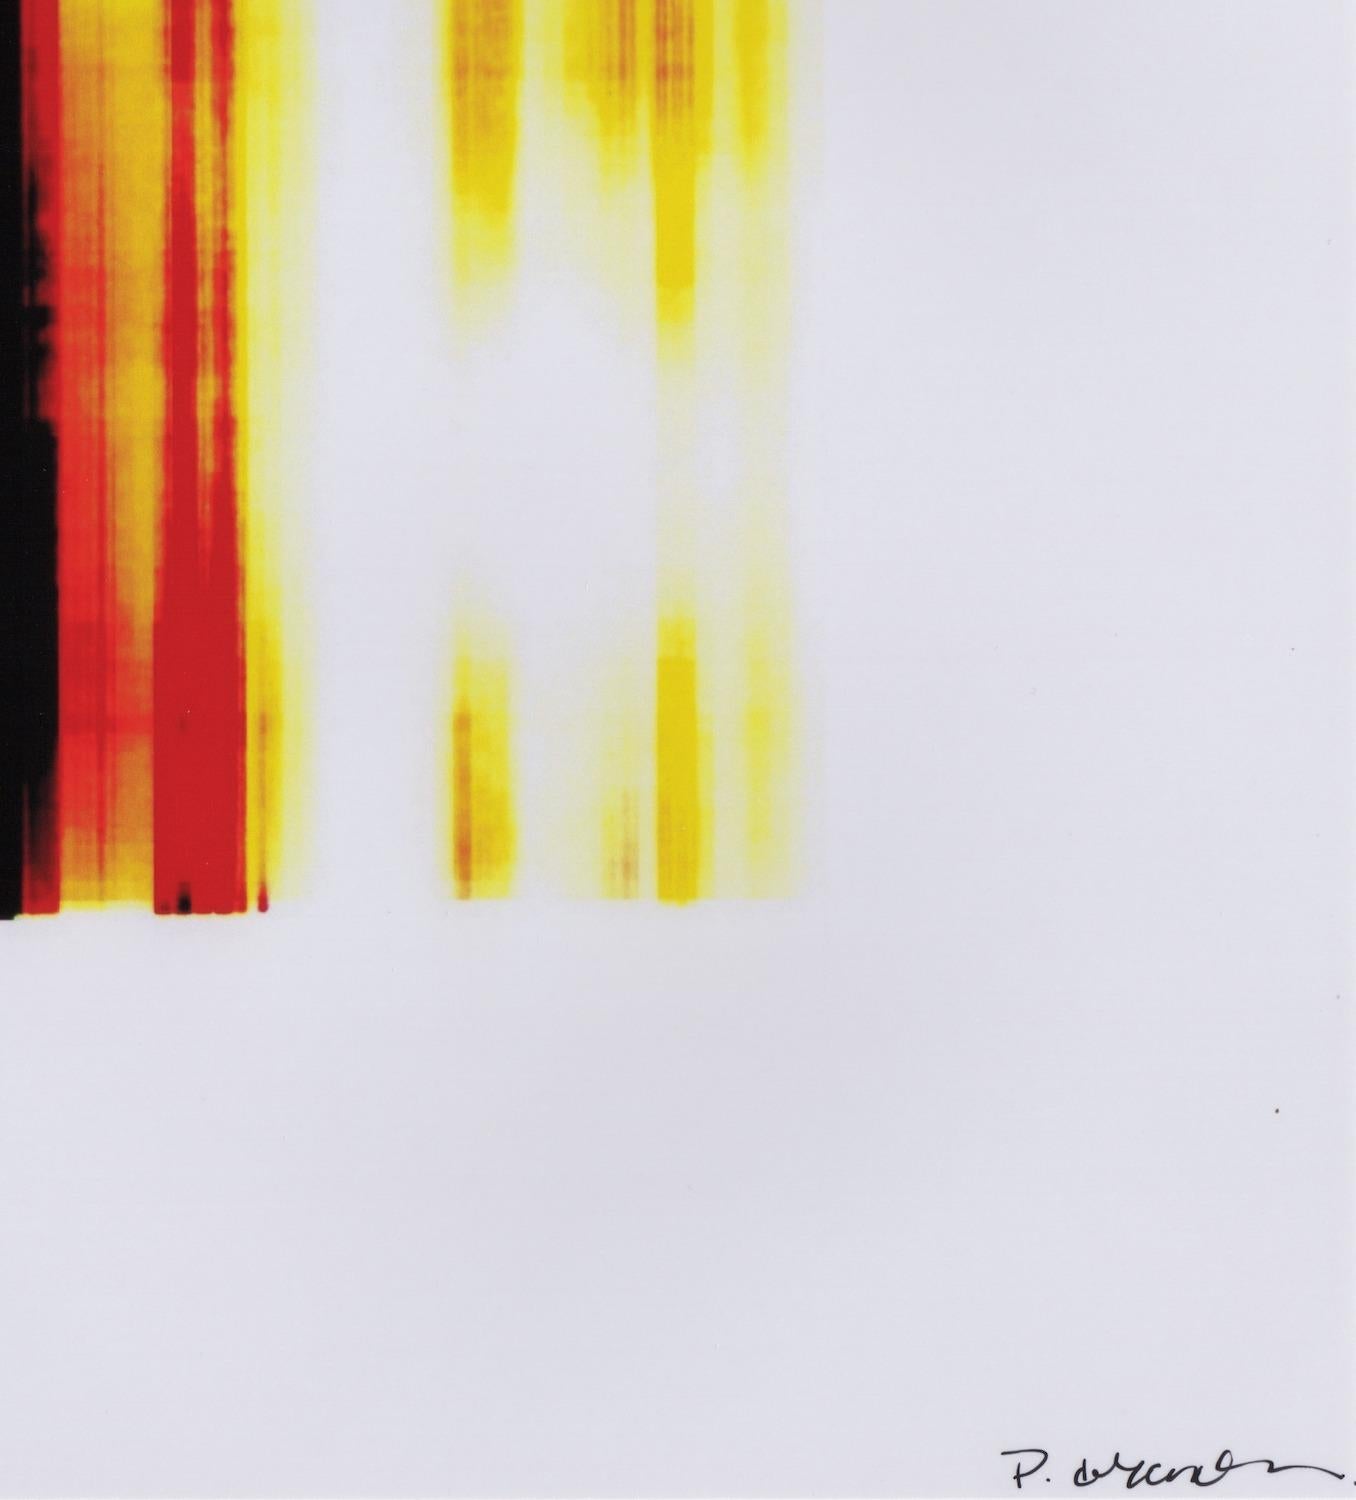 Patty deGrandpre’s “Broken Television 301” is a radiant 4.5 x 4.25 inch abstract unique inkjet digital print with warm hues of yellow, orange, and red offset by a contrasting rectangle of black. The layers and dissolving striations of this print are